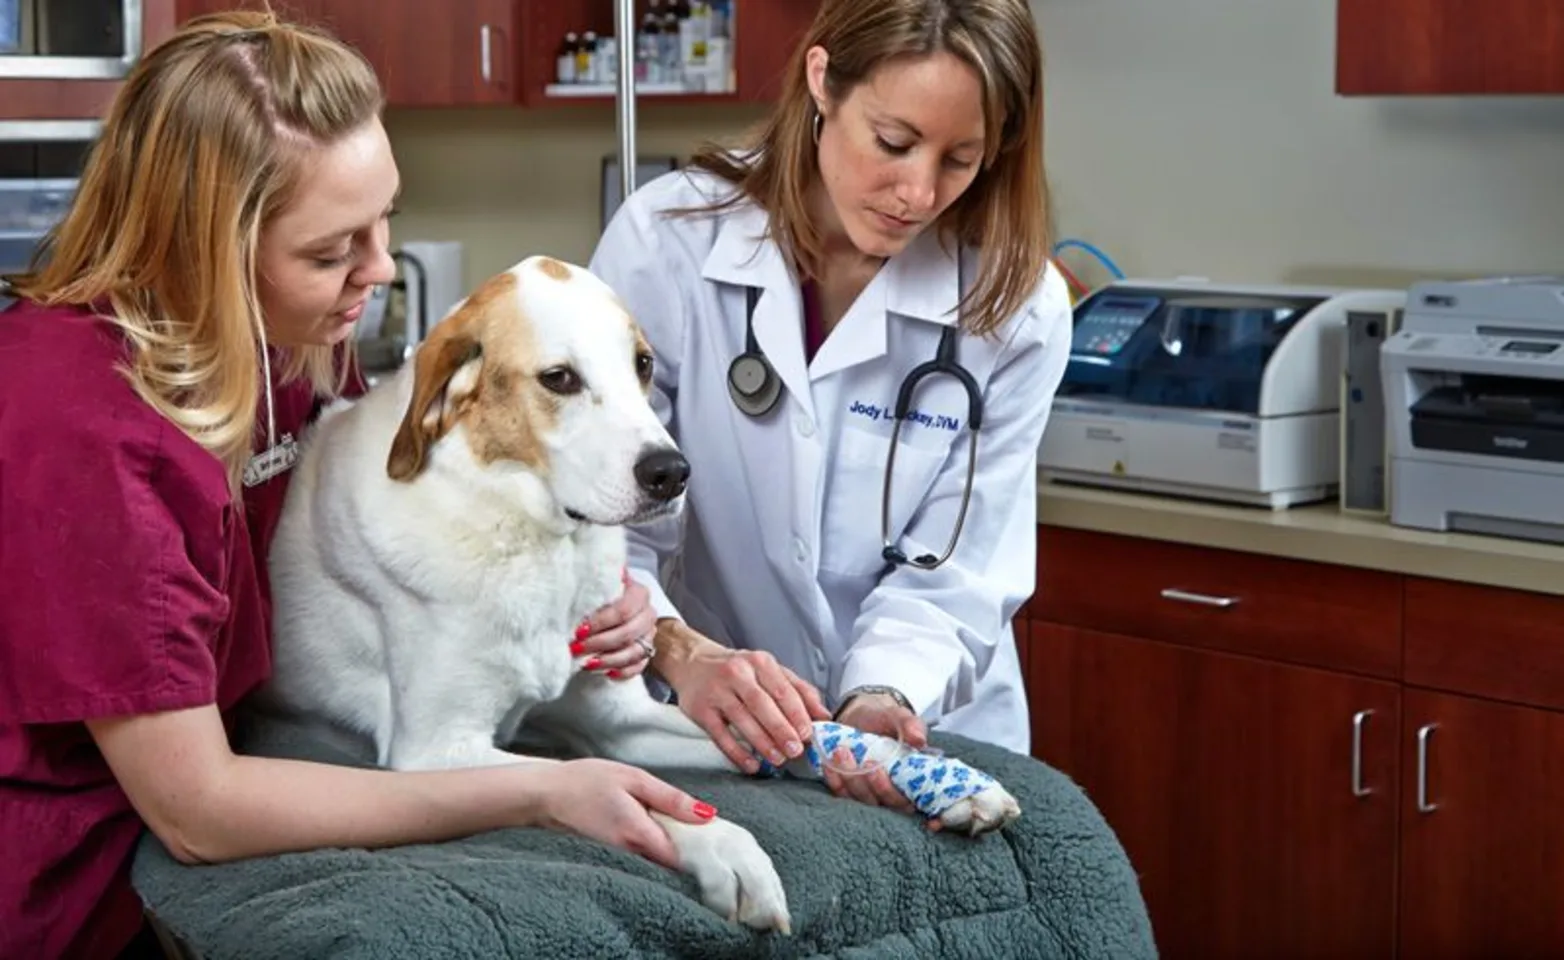 Vet and Vet Assistant checking dogs paws